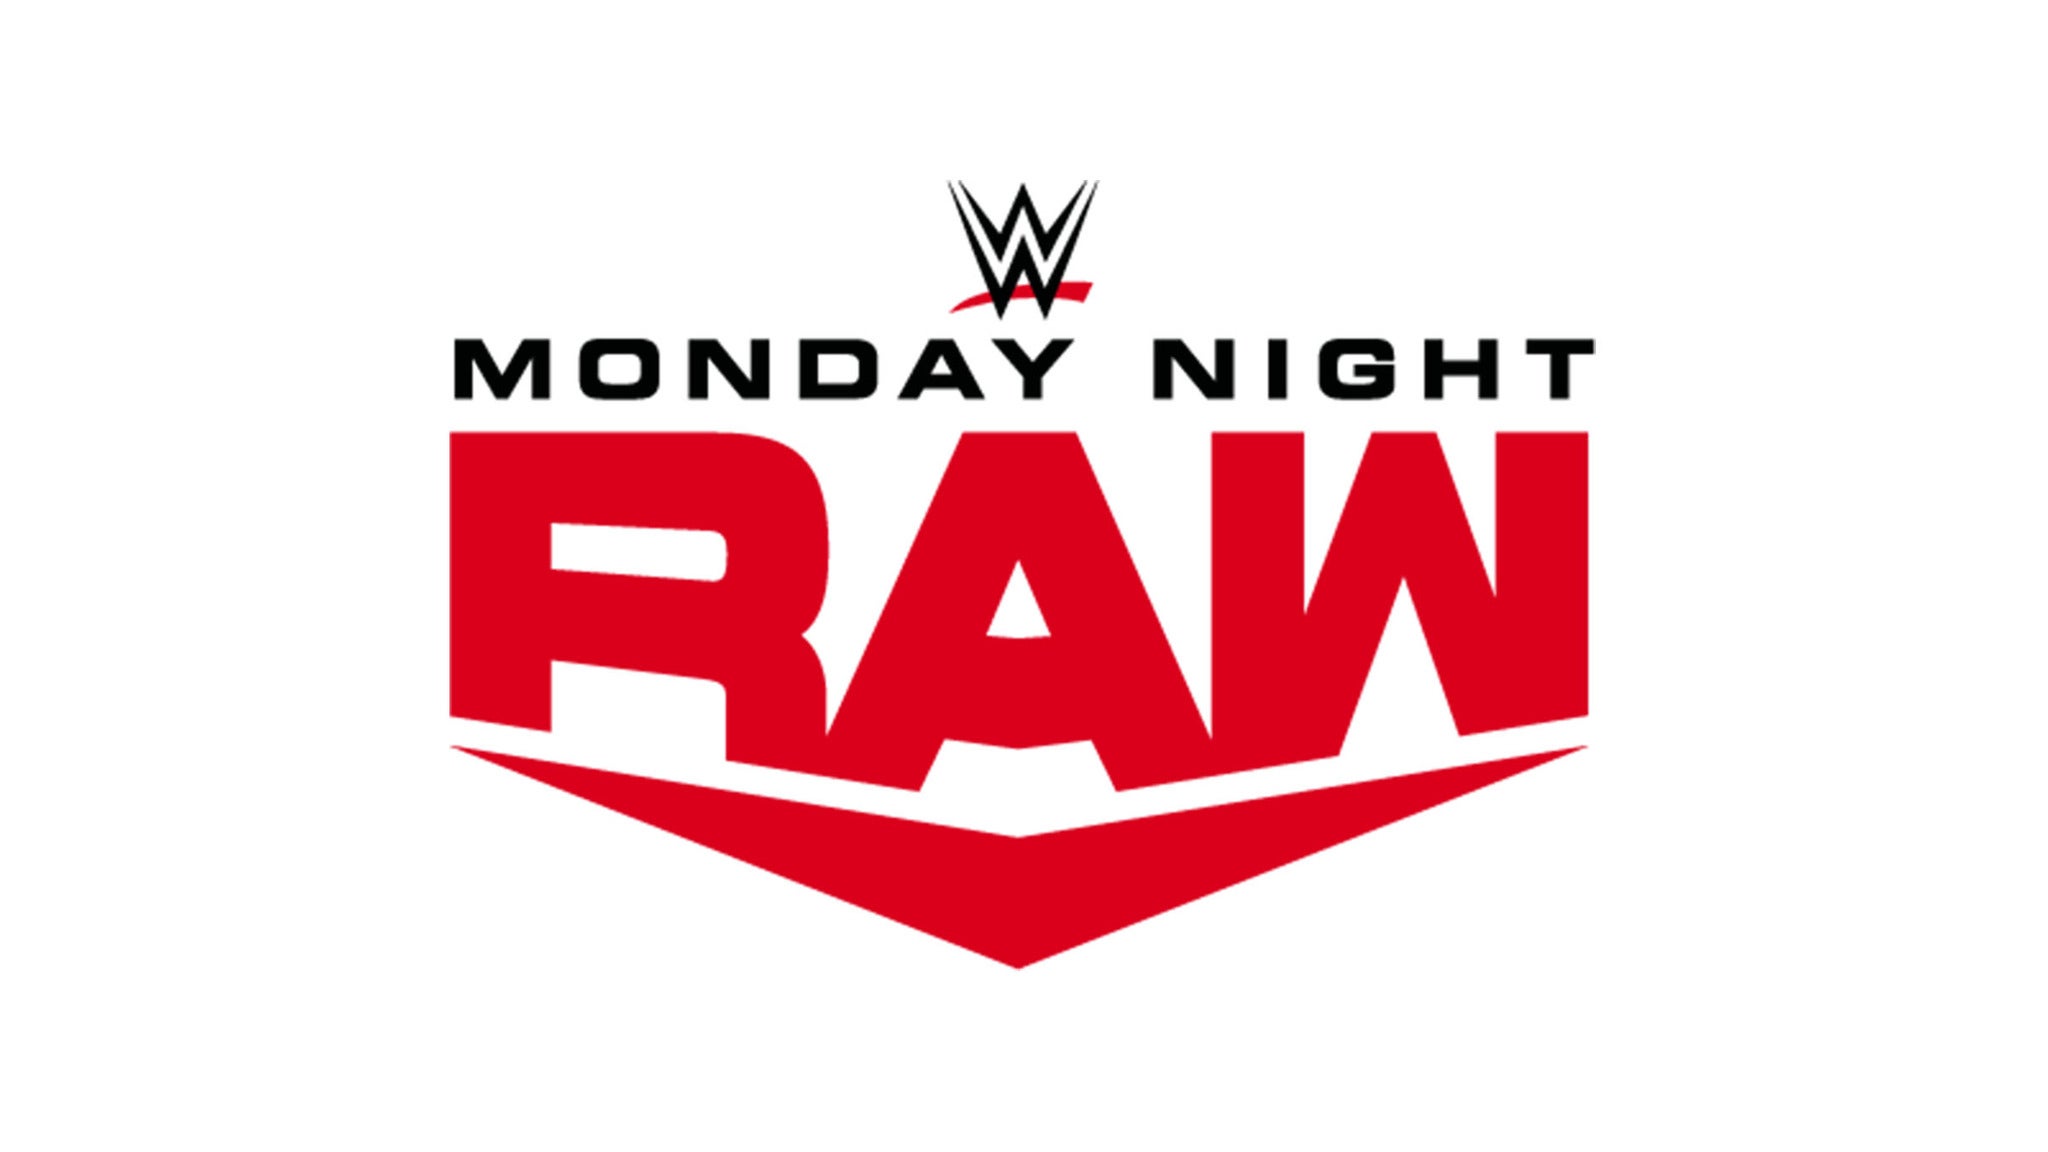 presale password for WWE Monday Night RAW tickets in Pittsburgh - PA (PPG Paints Arena)